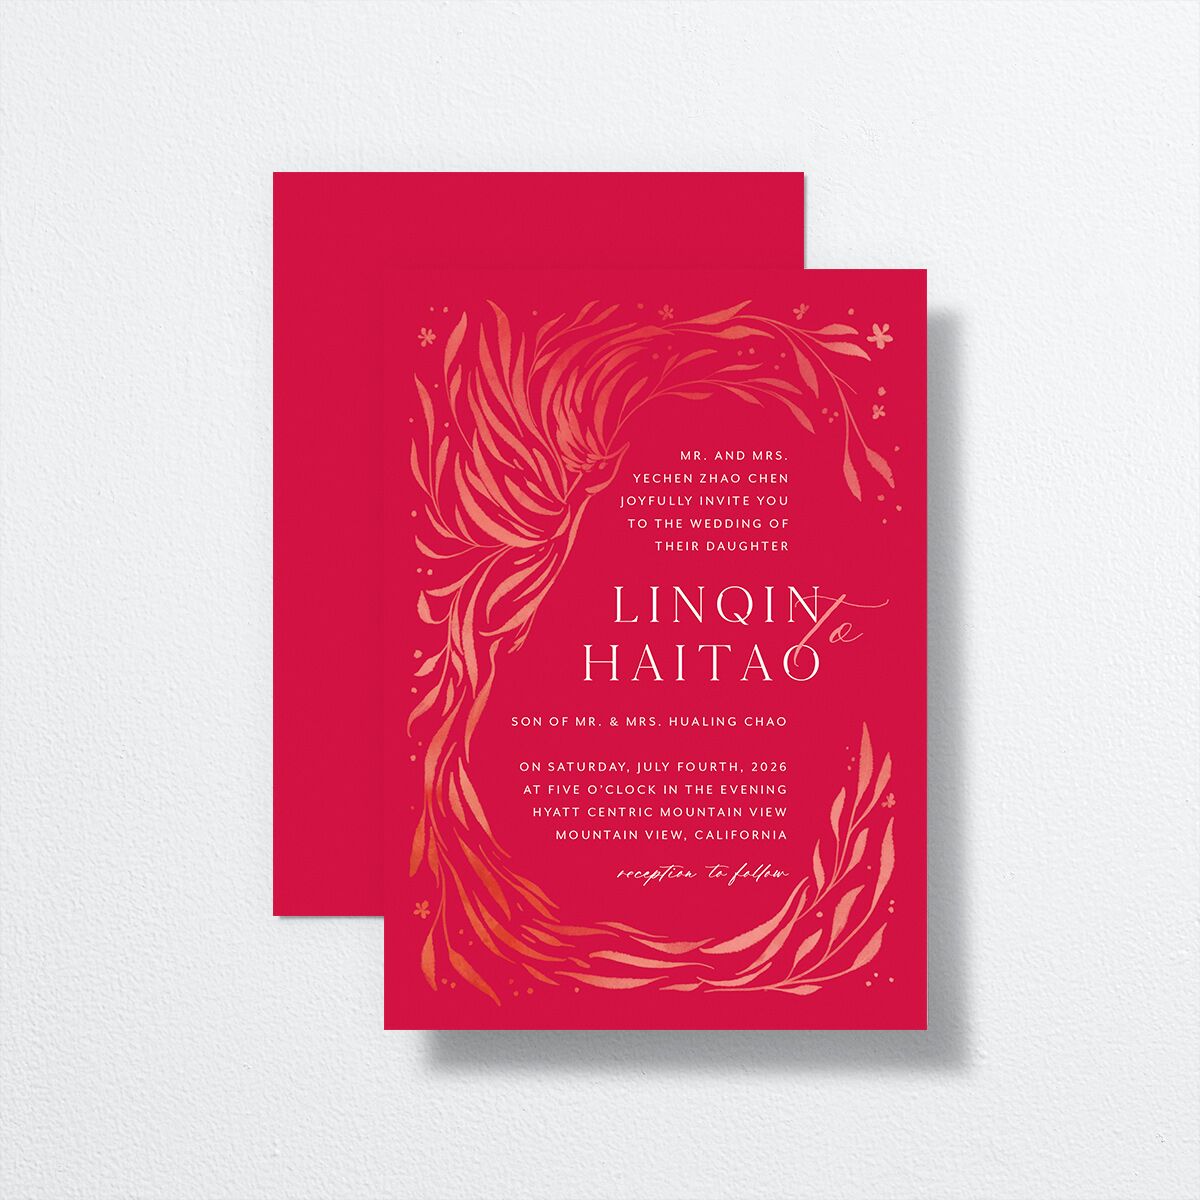 Romantic Phoenix Wedding Invitations front-and-back in red